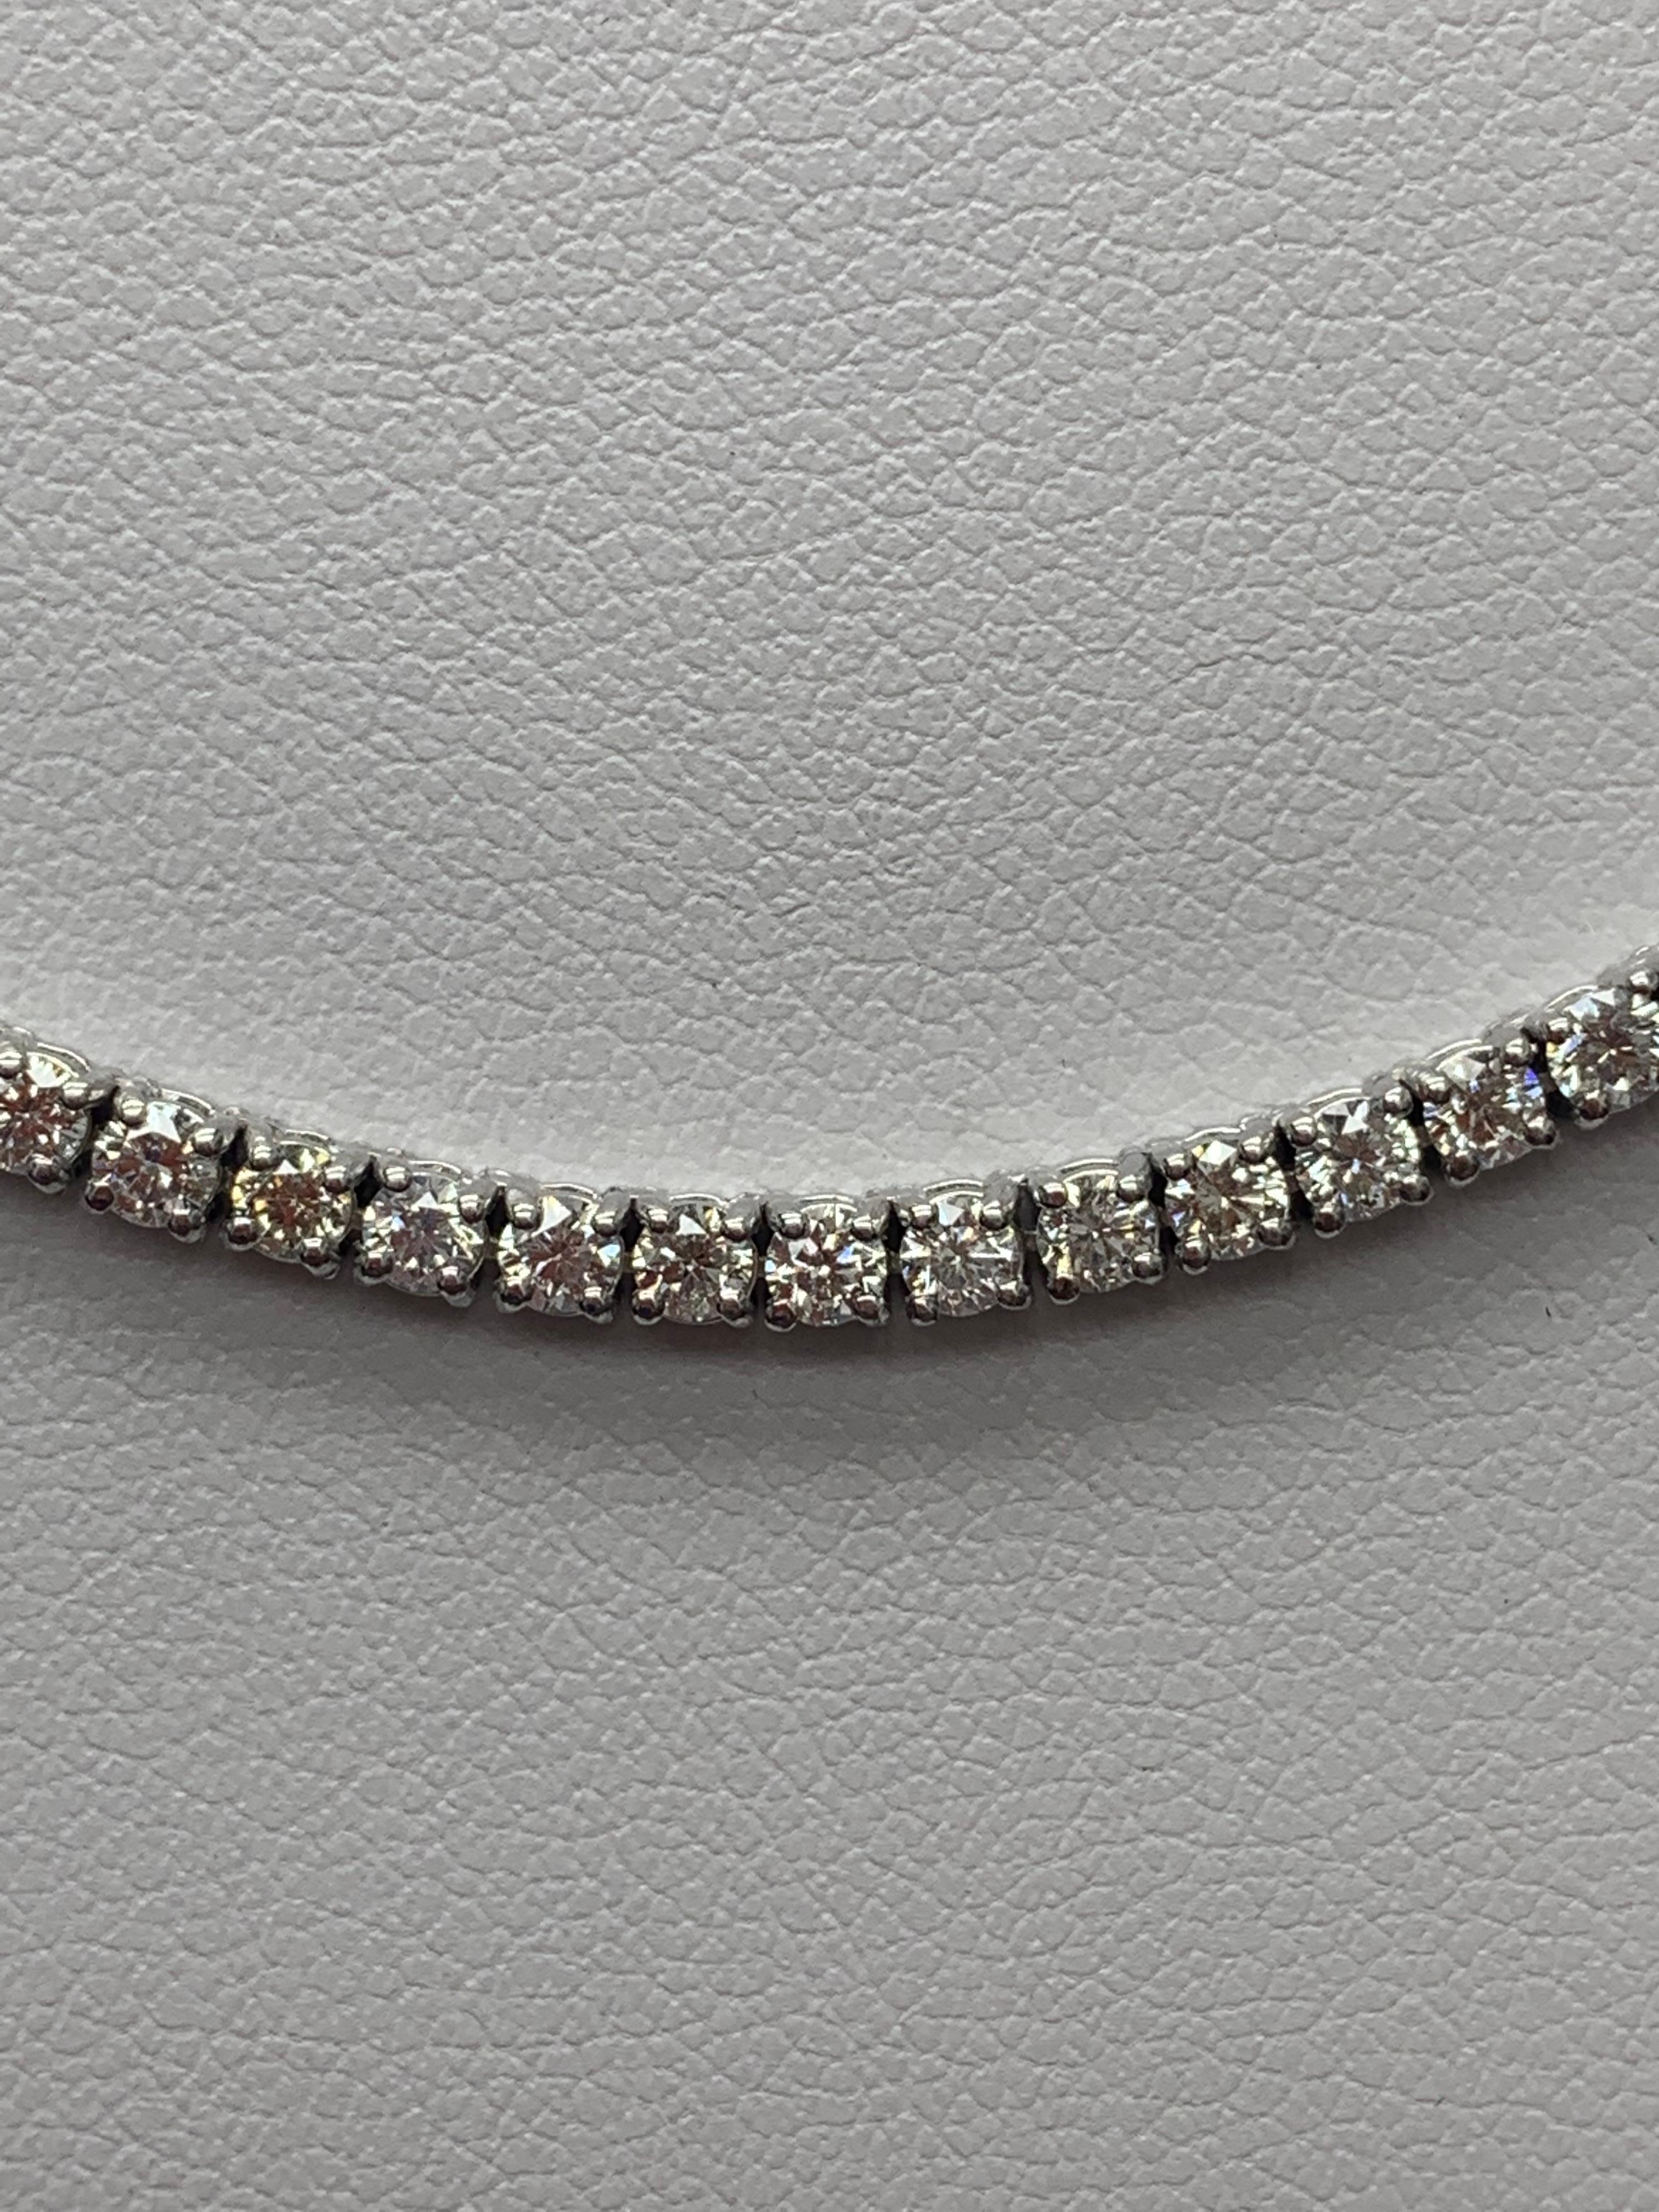 Women's 11.31 Carat Diamond Tennis Necklace in 14K White Gold For Sale